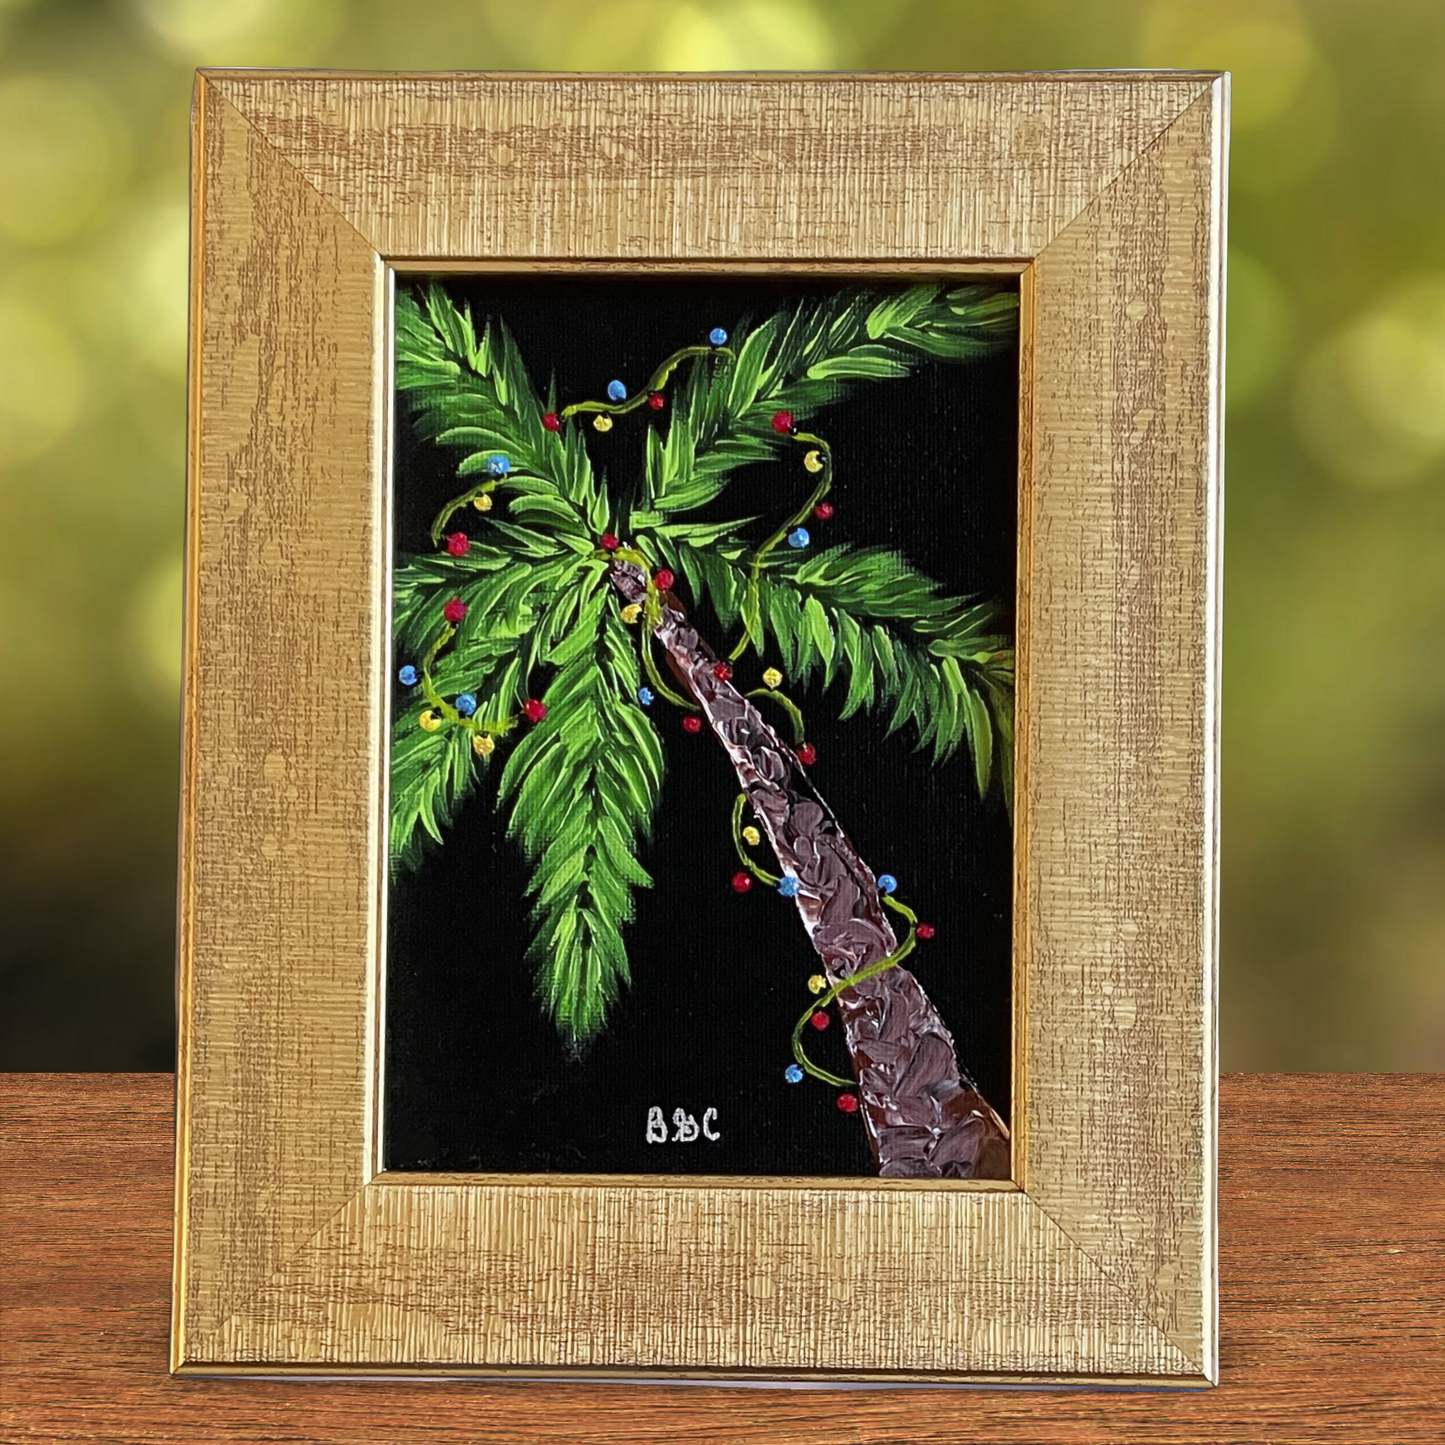 Original Painting of Palm Tree with Christmas Lights in frame